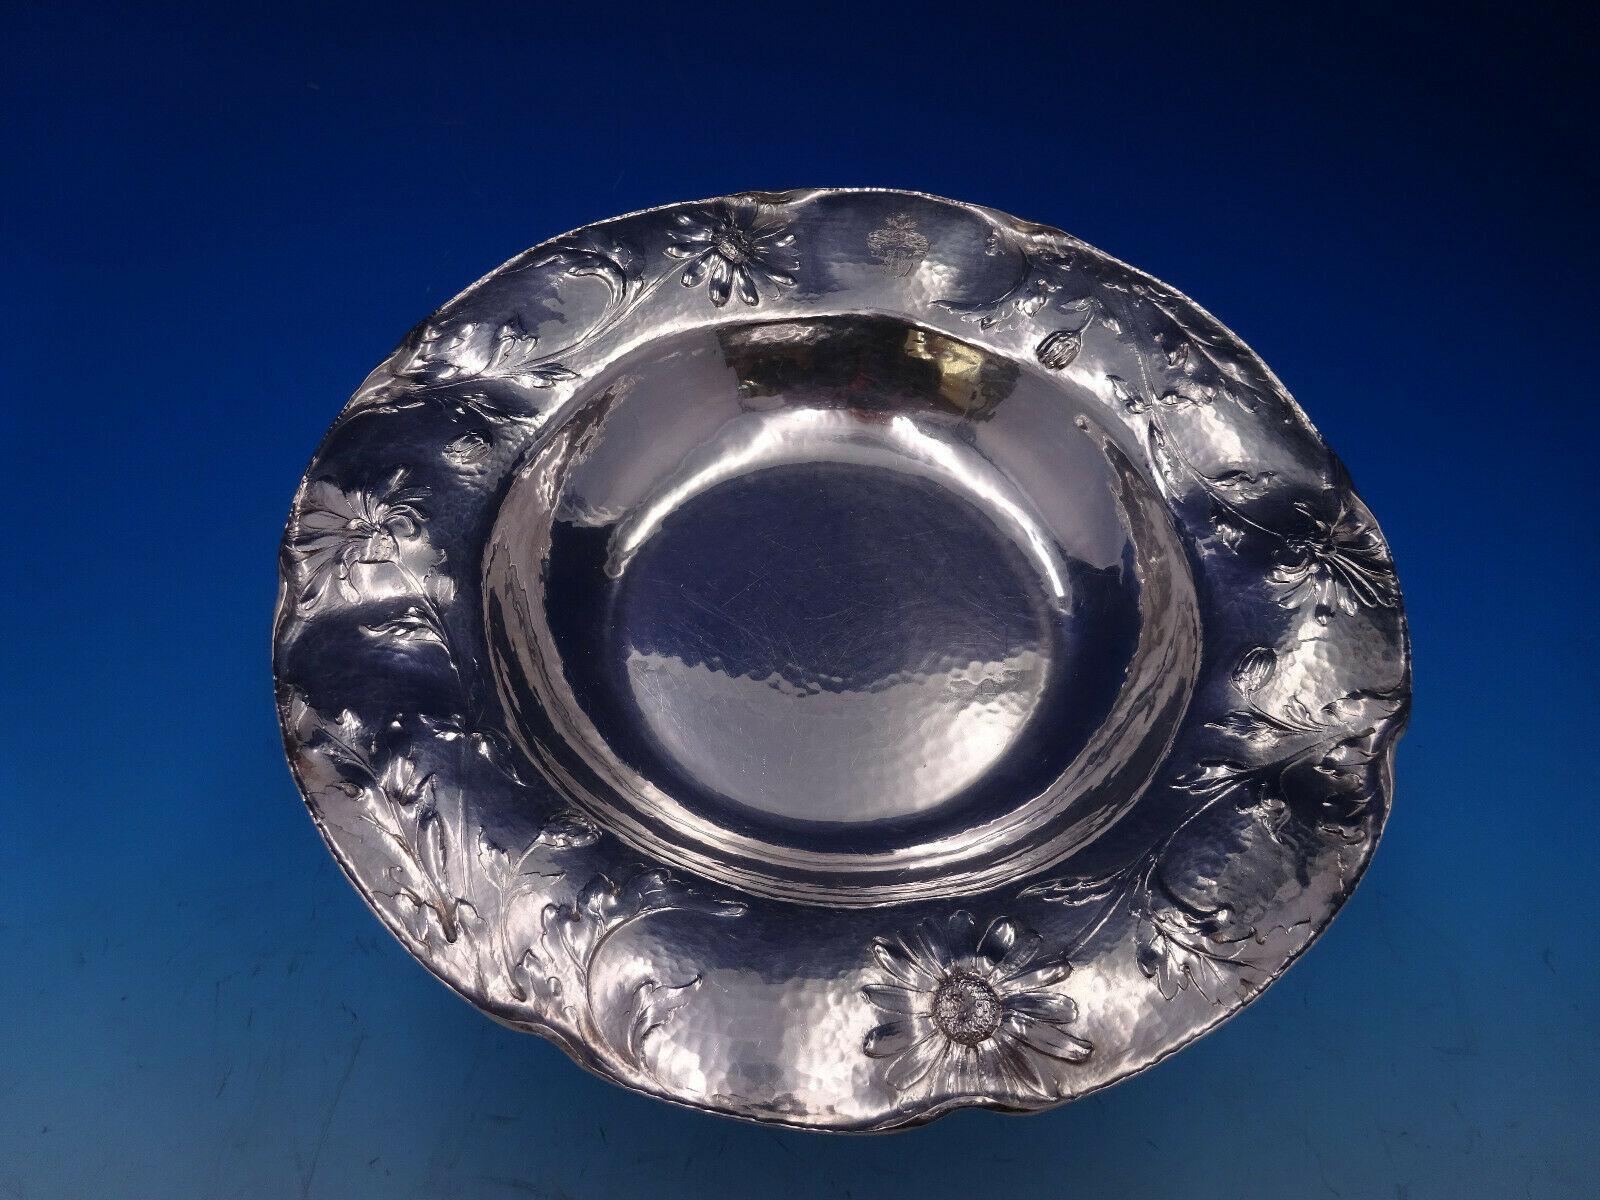 Martele by Gorham

Superb exceedingly rare set of 12 Martele’ by Gorham .9584 sterling silver Soup Bowls with daisy motif, made July 1907, making time 6 hours, chasing time 25 hours by Emil Stursberg. Gorgeous hand chased daisy decoration and hand